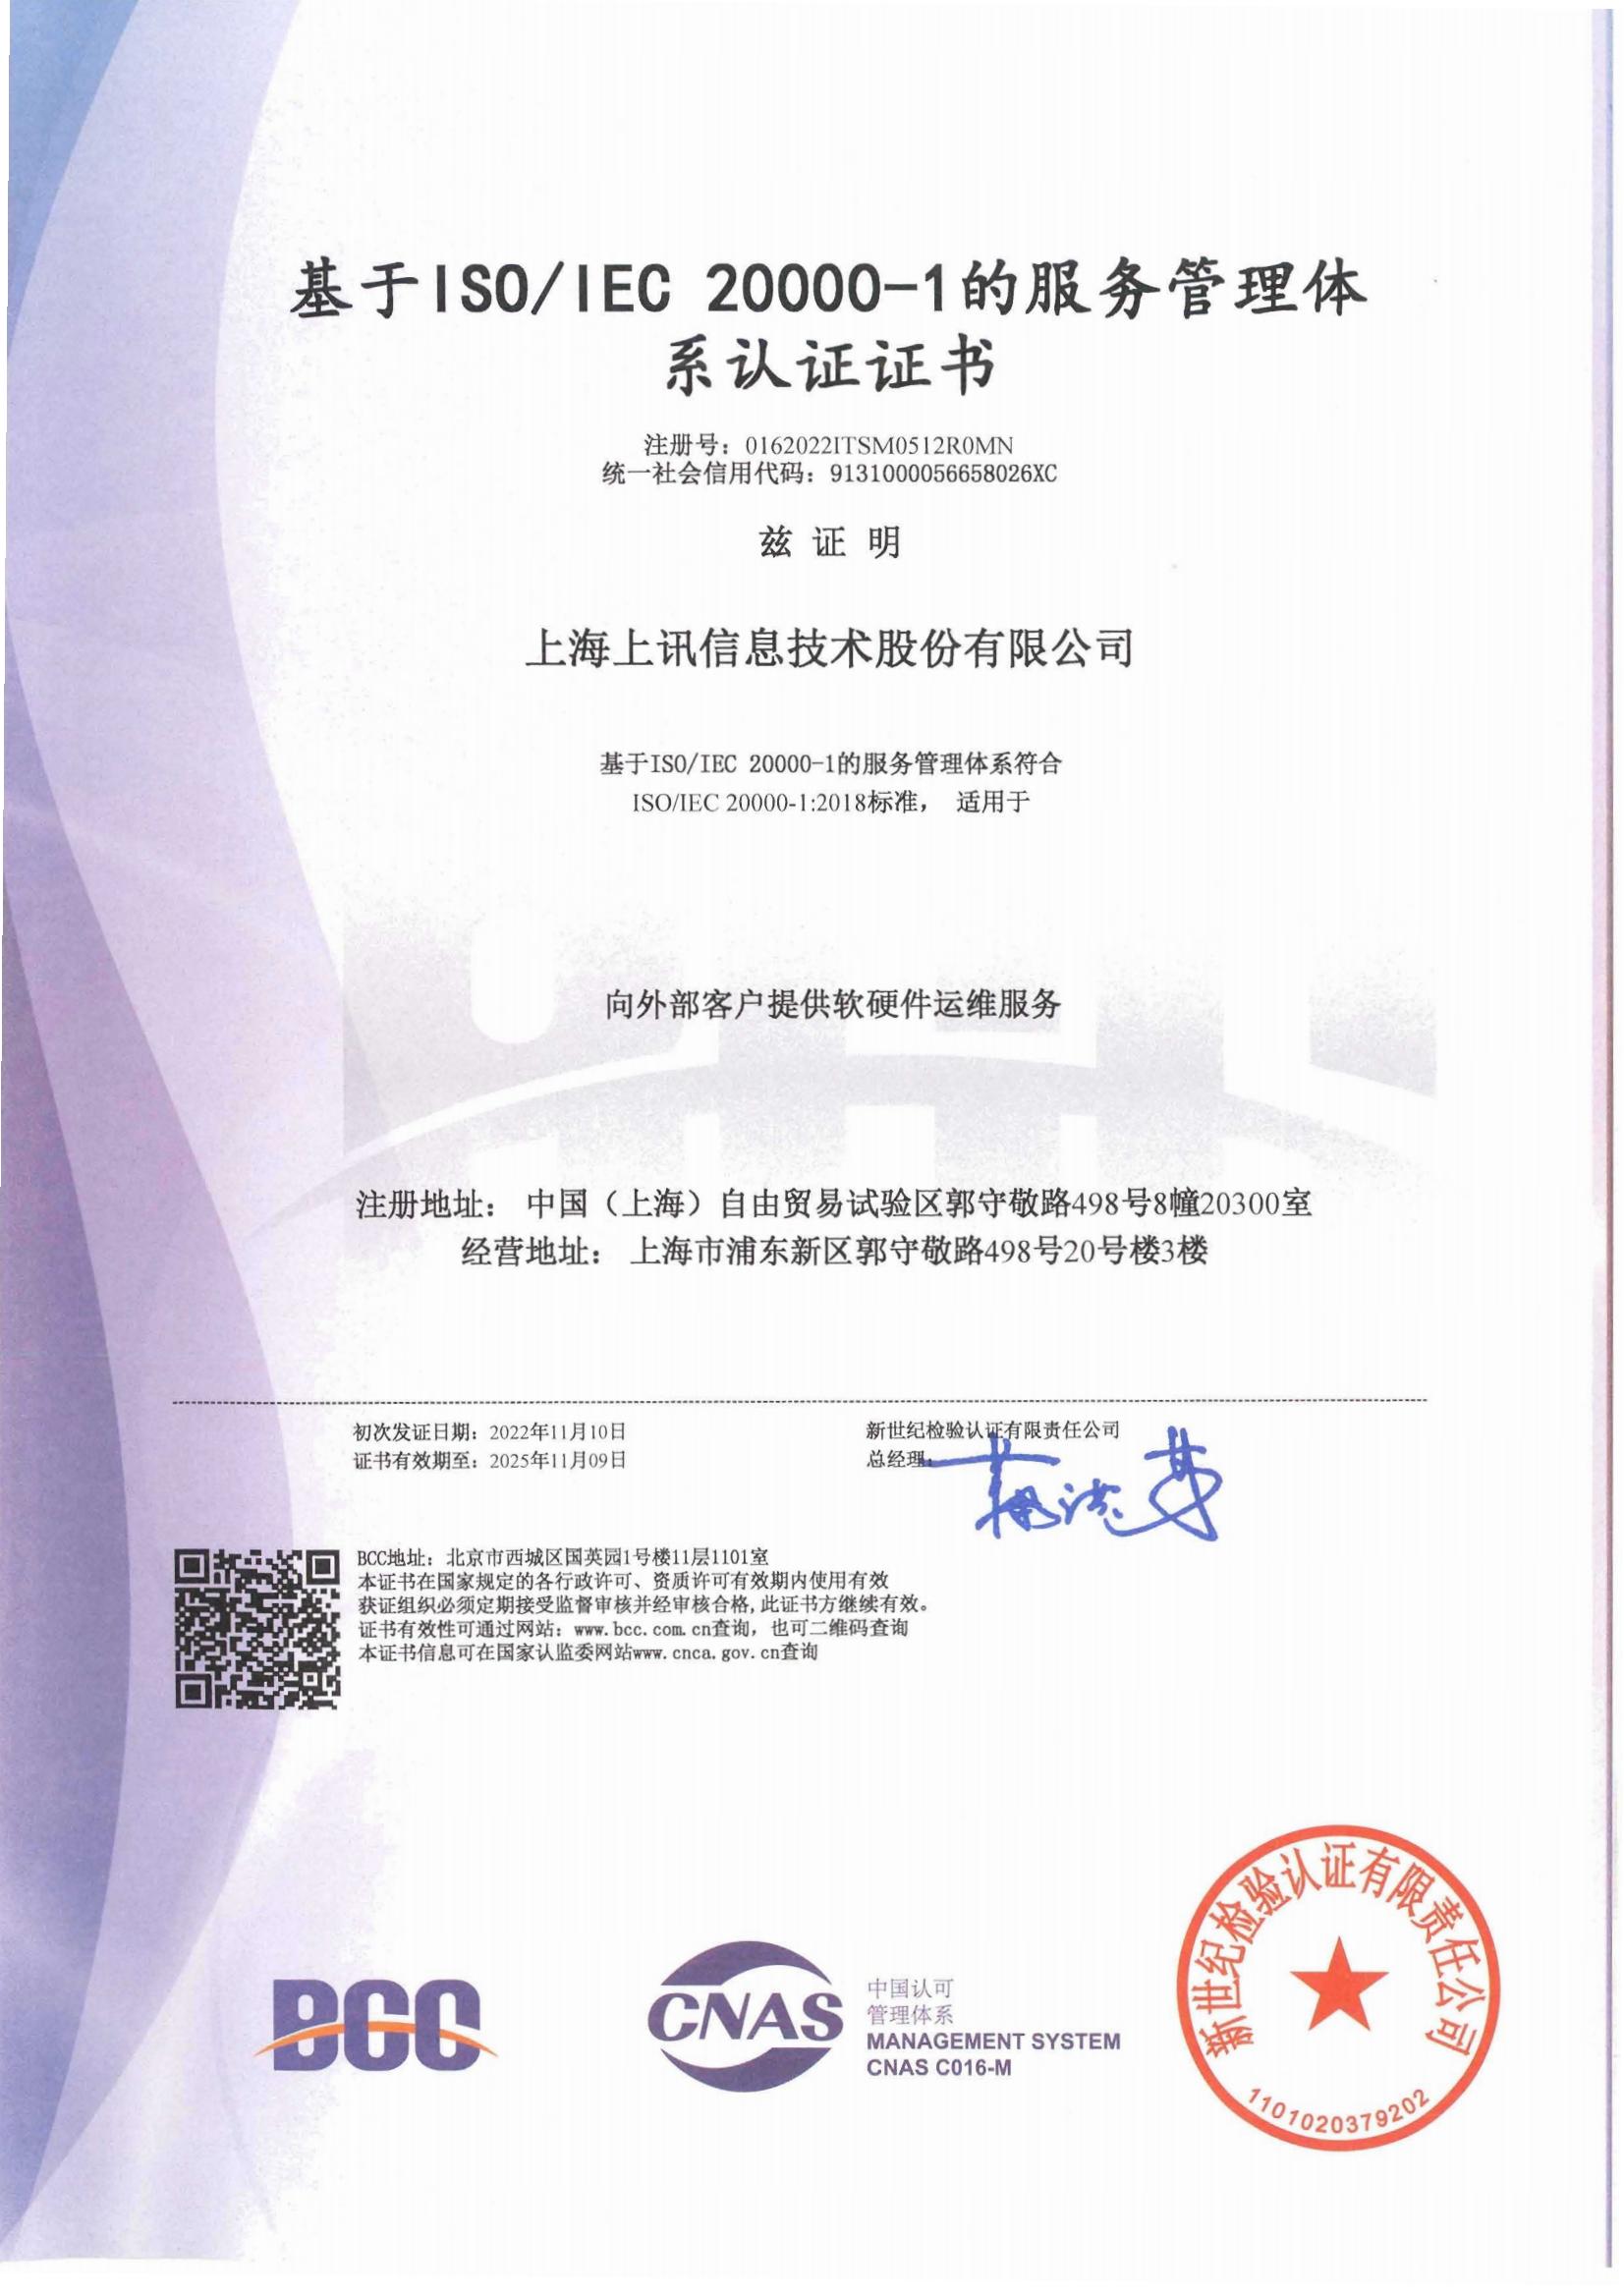 ISO20000 Service Management System Certificate